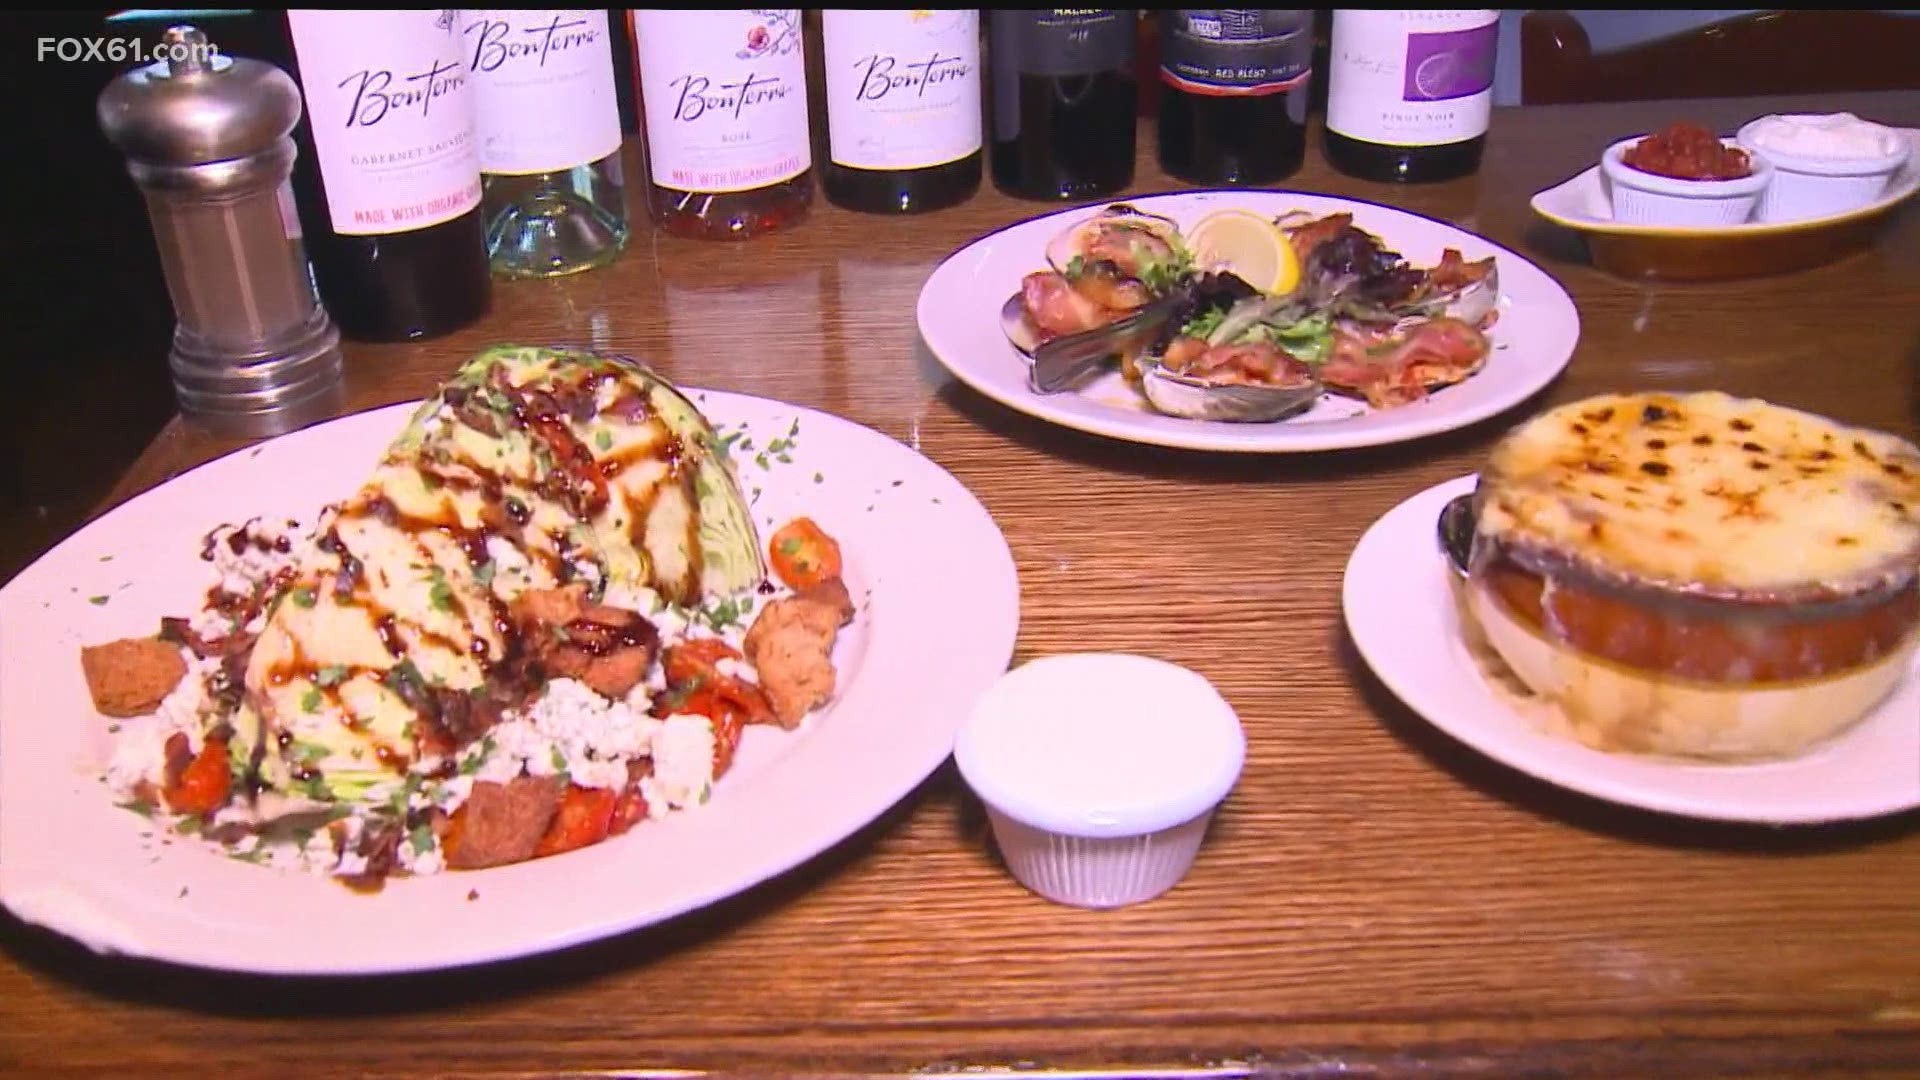 Foodie Friday is in Madison at Donahue’s Madison Beach Grille. We're talking all sorts goodness. Ahi Tuna Nacho’s anyone?